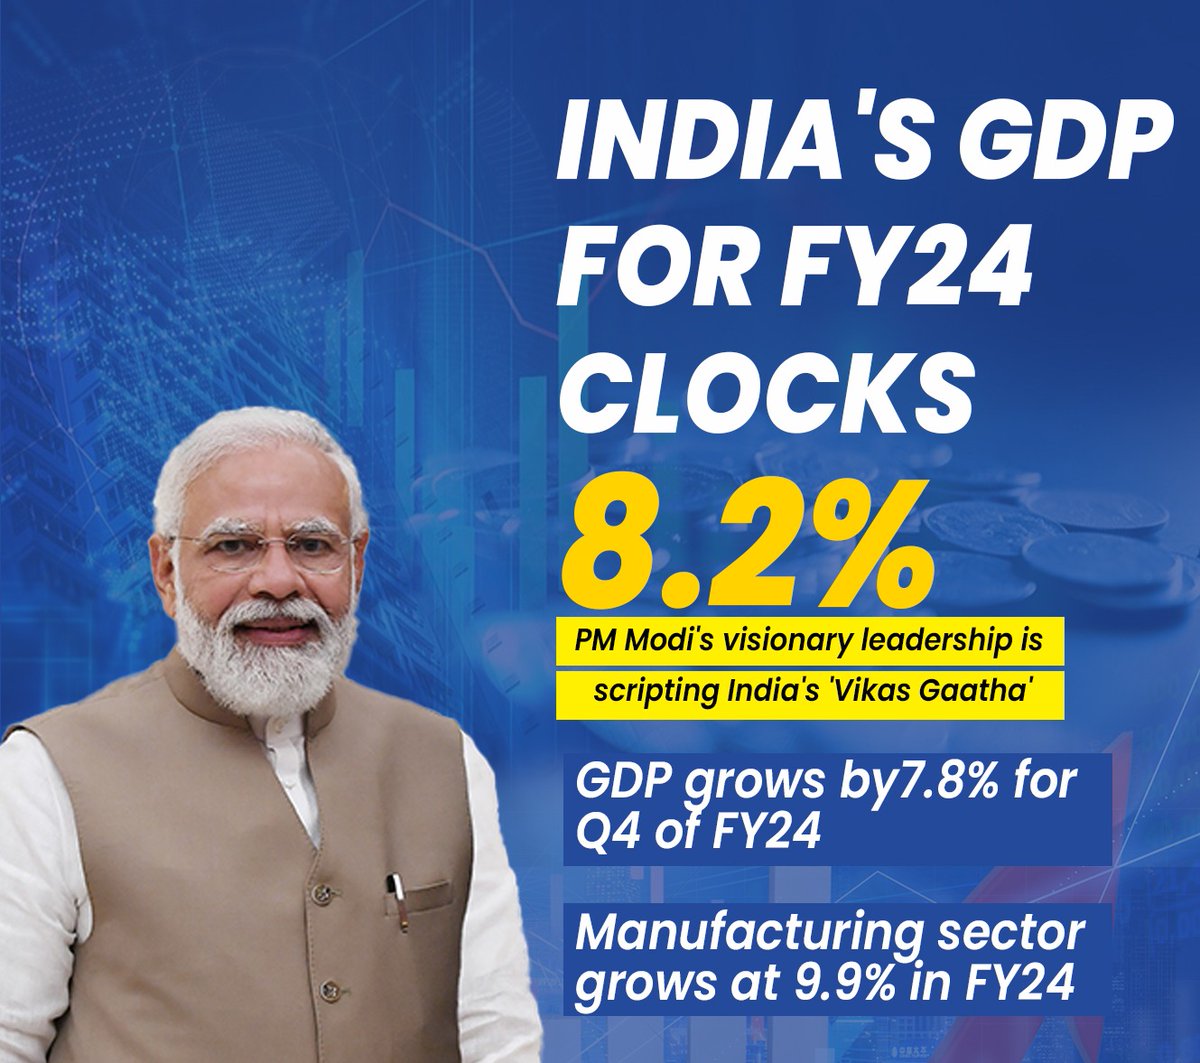 India faced once in a century pandemic, a global war like situation and major disruption in supply chains and yet India's GDP keeps clocking the highest growth rate while other countries are still reeling under pressure. It tells how good our economic management has been under